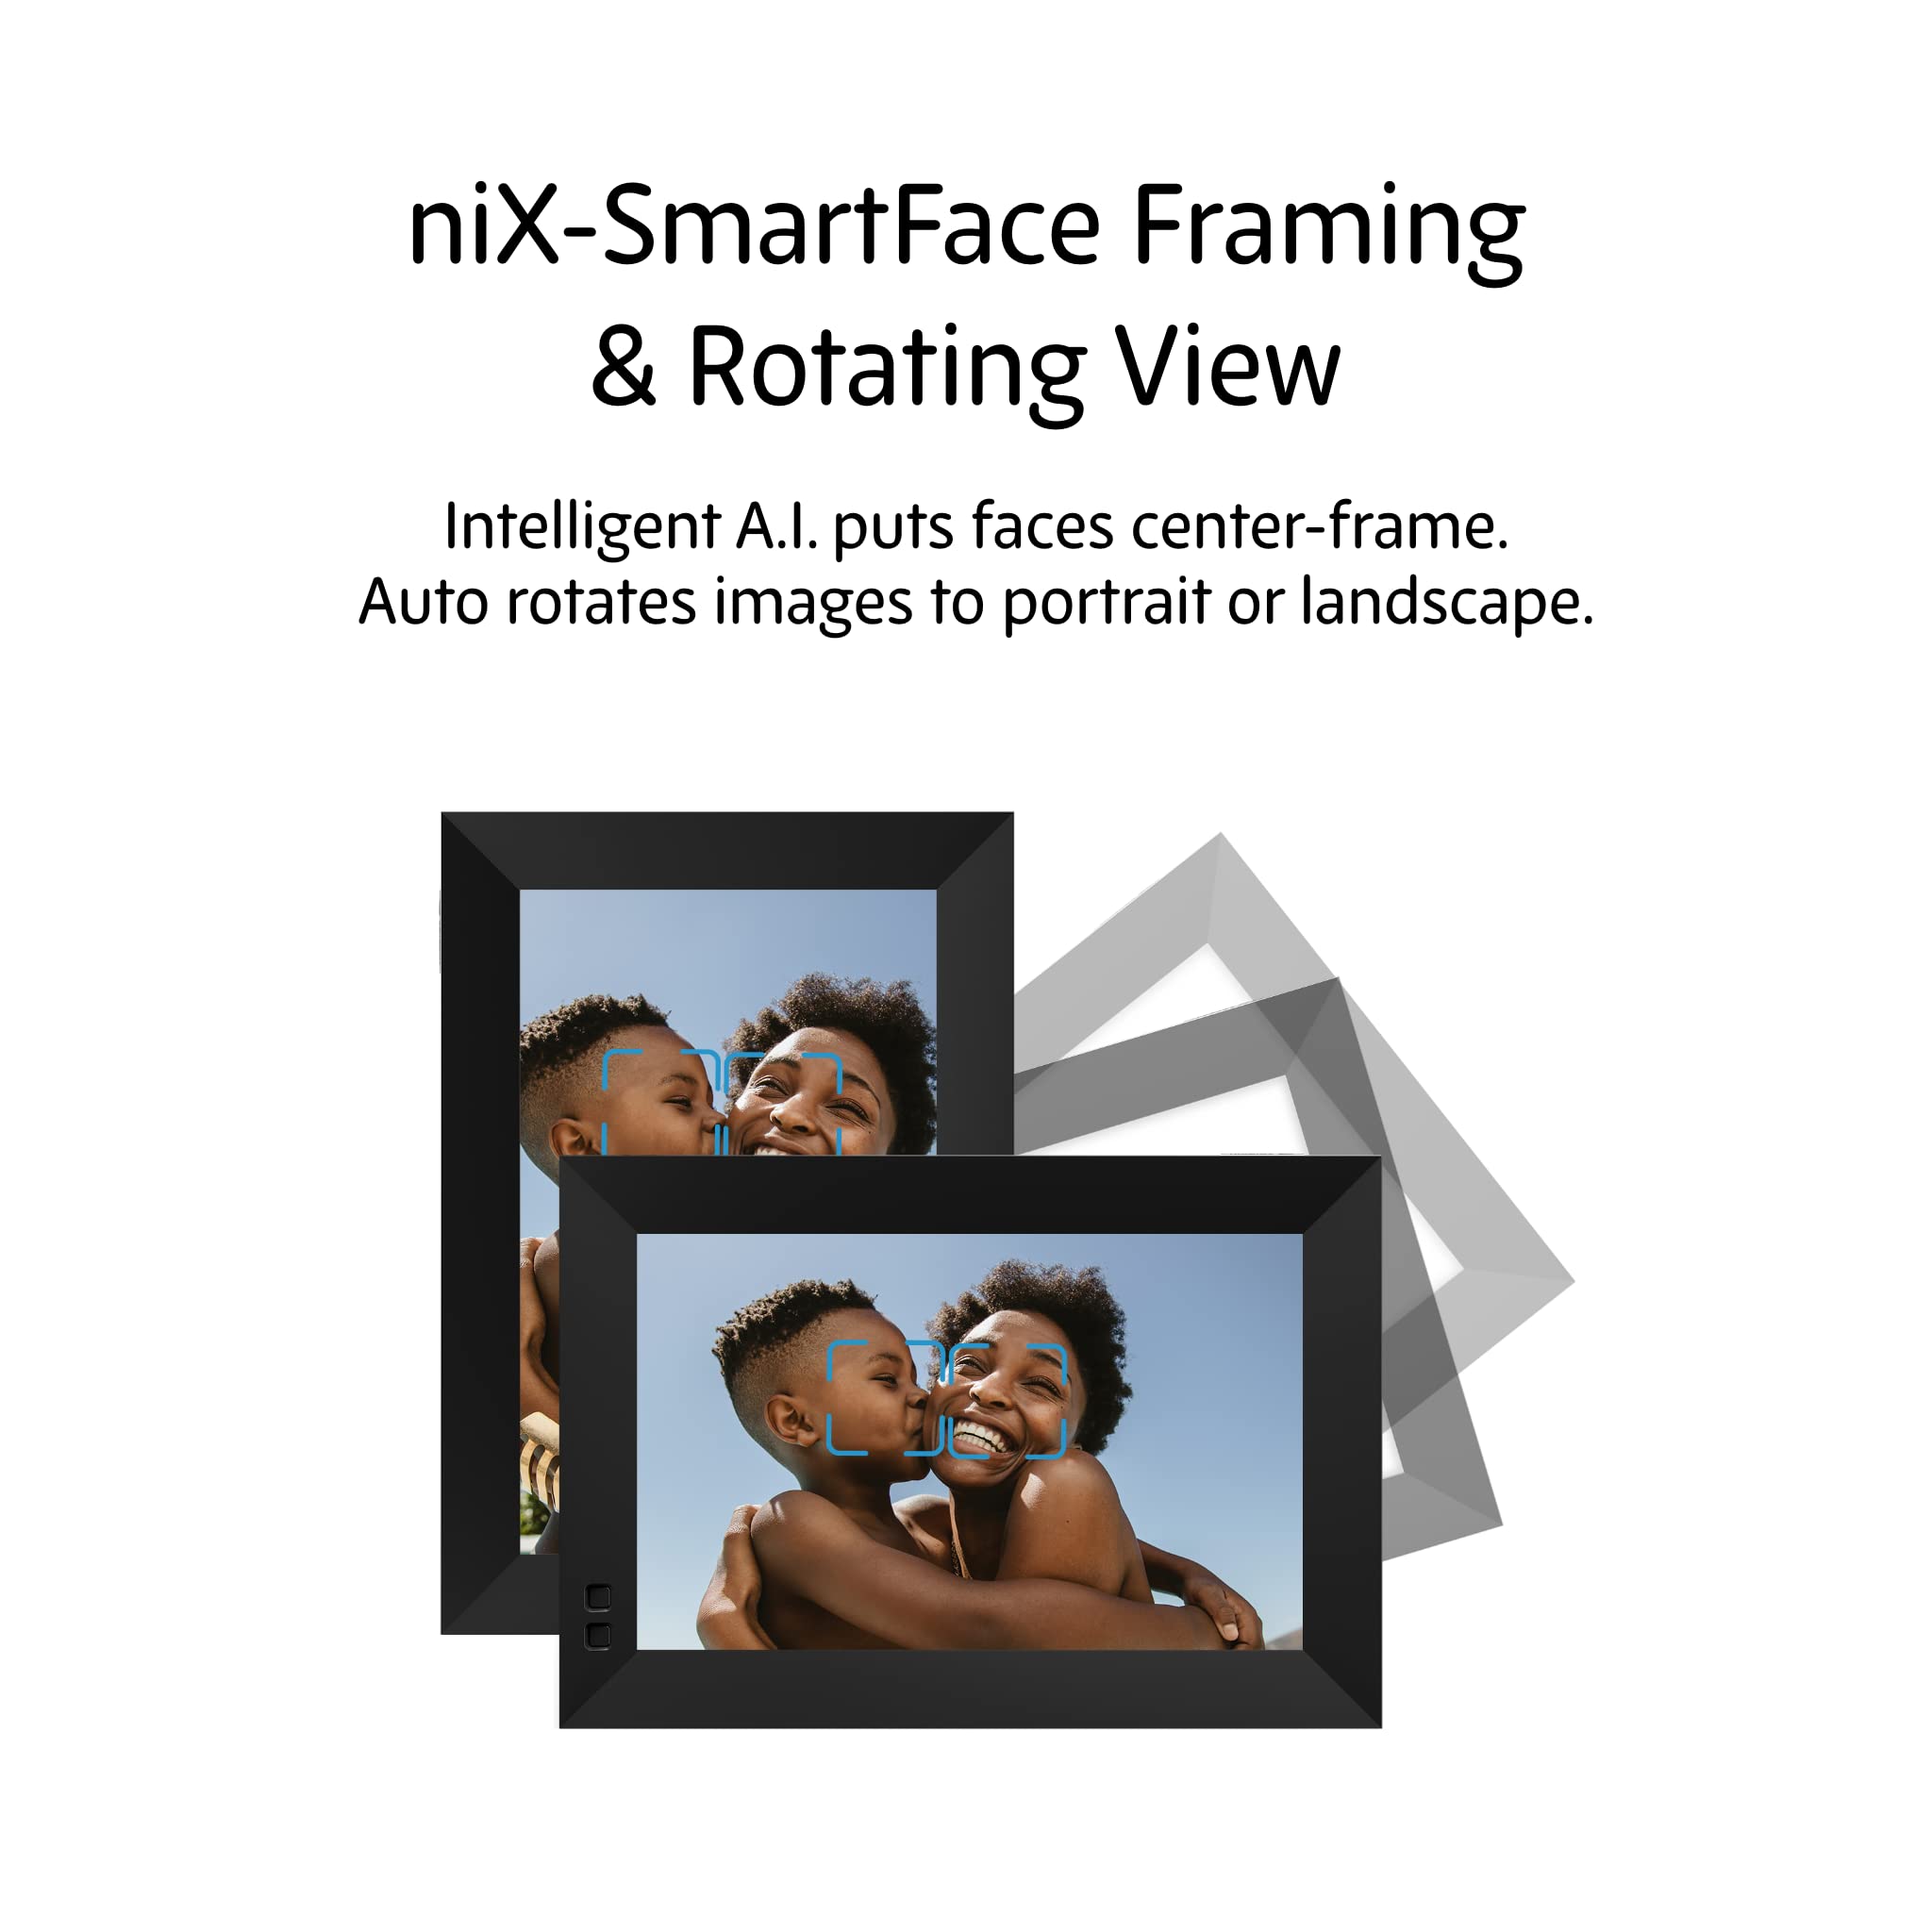 Nixplay 10.1 inch Smart Digital Photo Frame with WiFi (W10F) - Black - Includes 1 year of Nixplay Plus for Exclusive Print Discounts, Family-Sized Storage